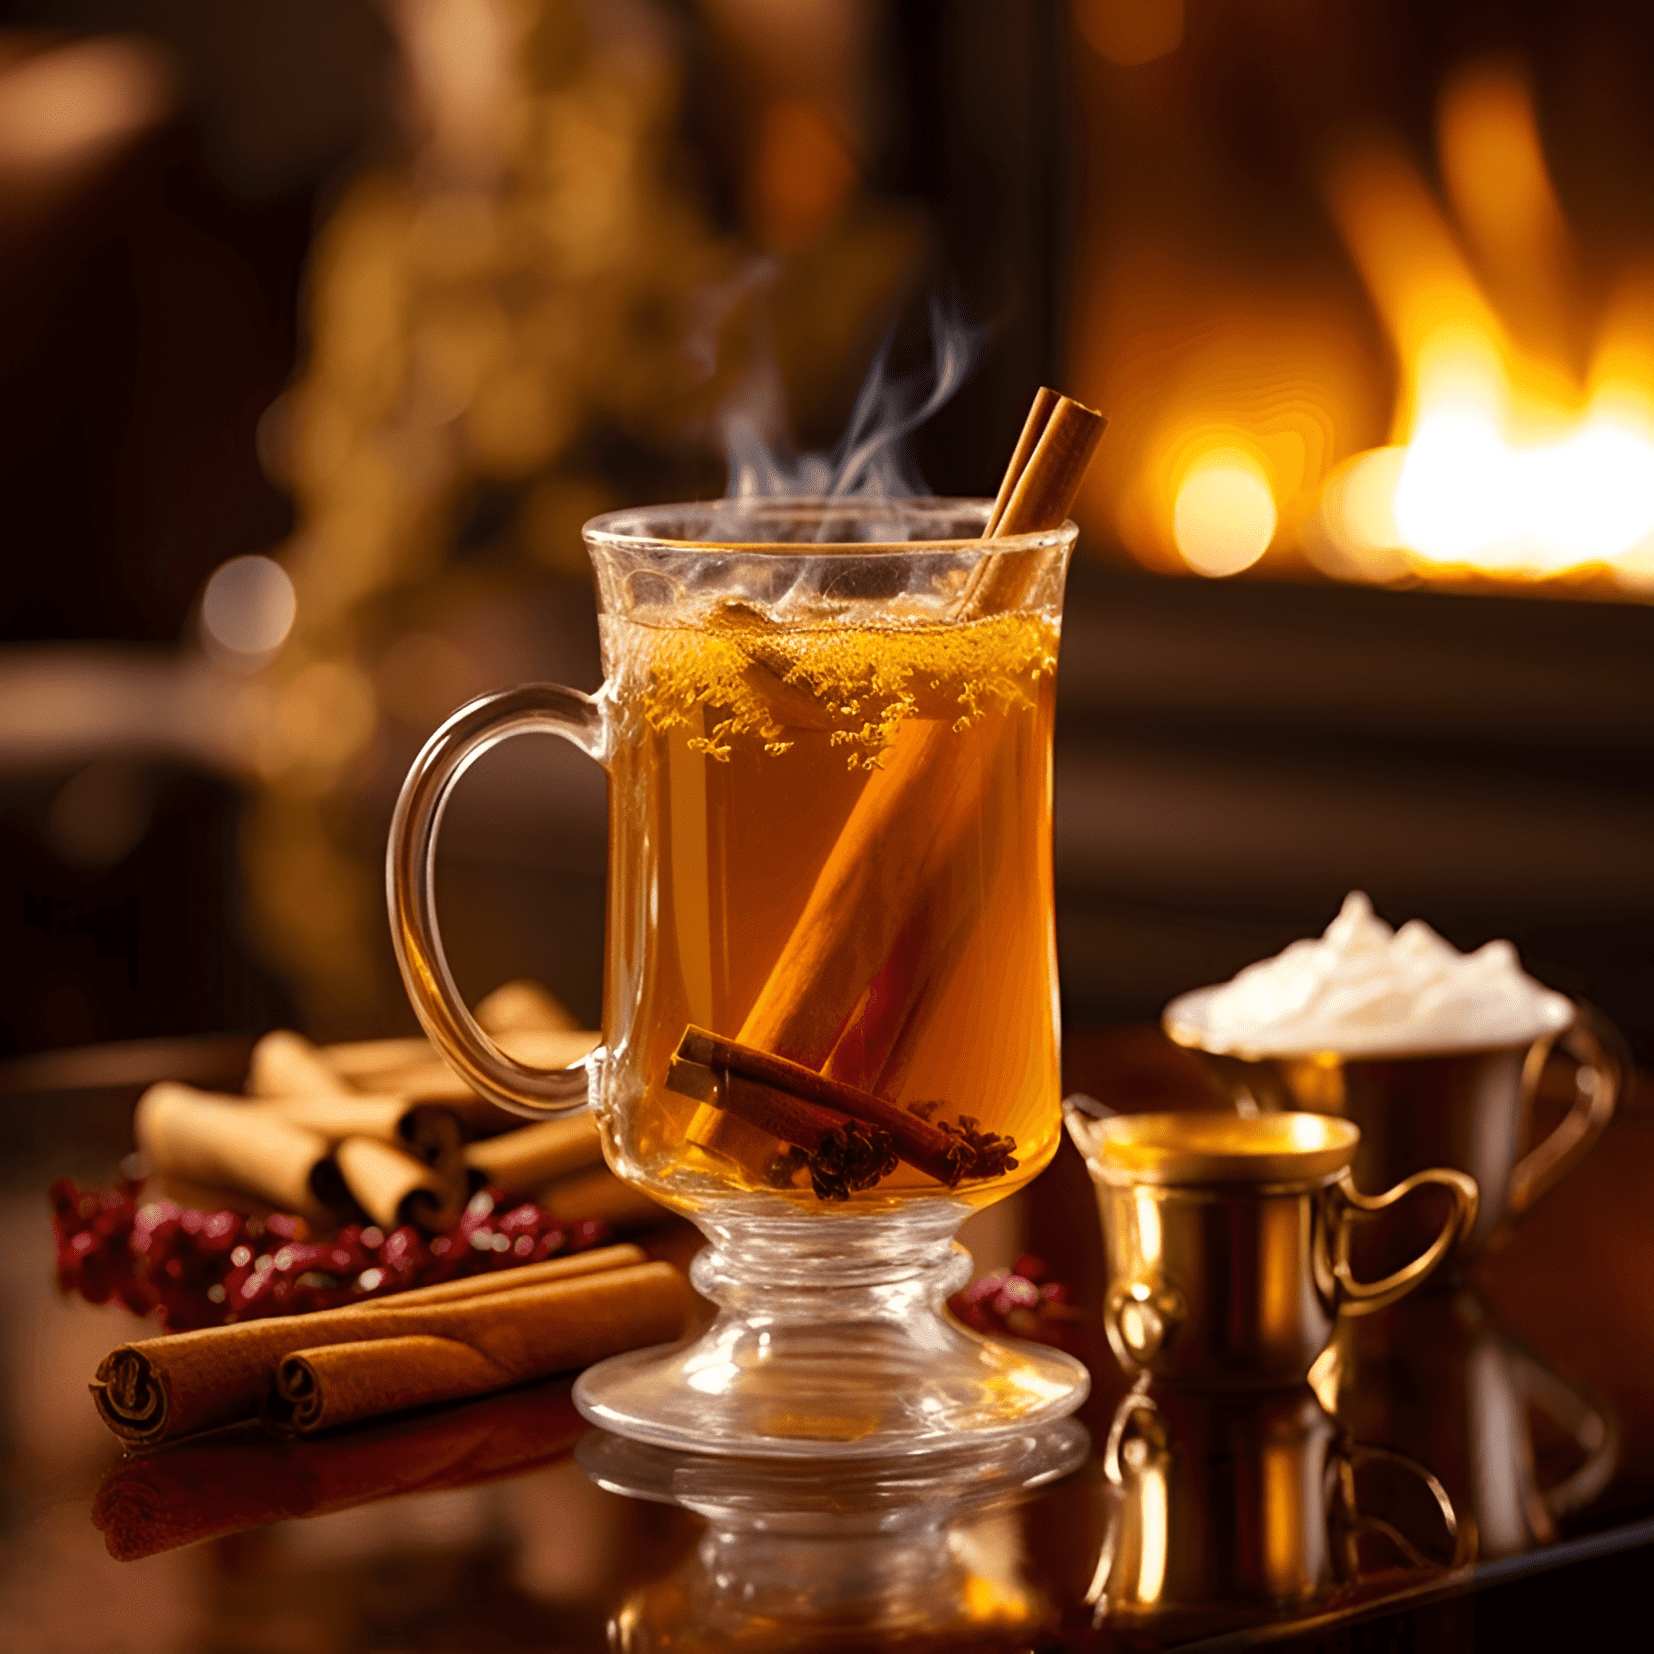 Hot Gold Cocktail Recipe - The Hot Gold cocktail is a harmonious blend of sweet, spicy, and smoky flavors. The warmth of the whiskey is perfectly balanced by the sweetness of the honey and the tangy kick of the lemon juice. The cinnamon and cloves add a touch of spice, while the smoky aroma of the star anise lingers on the palate.